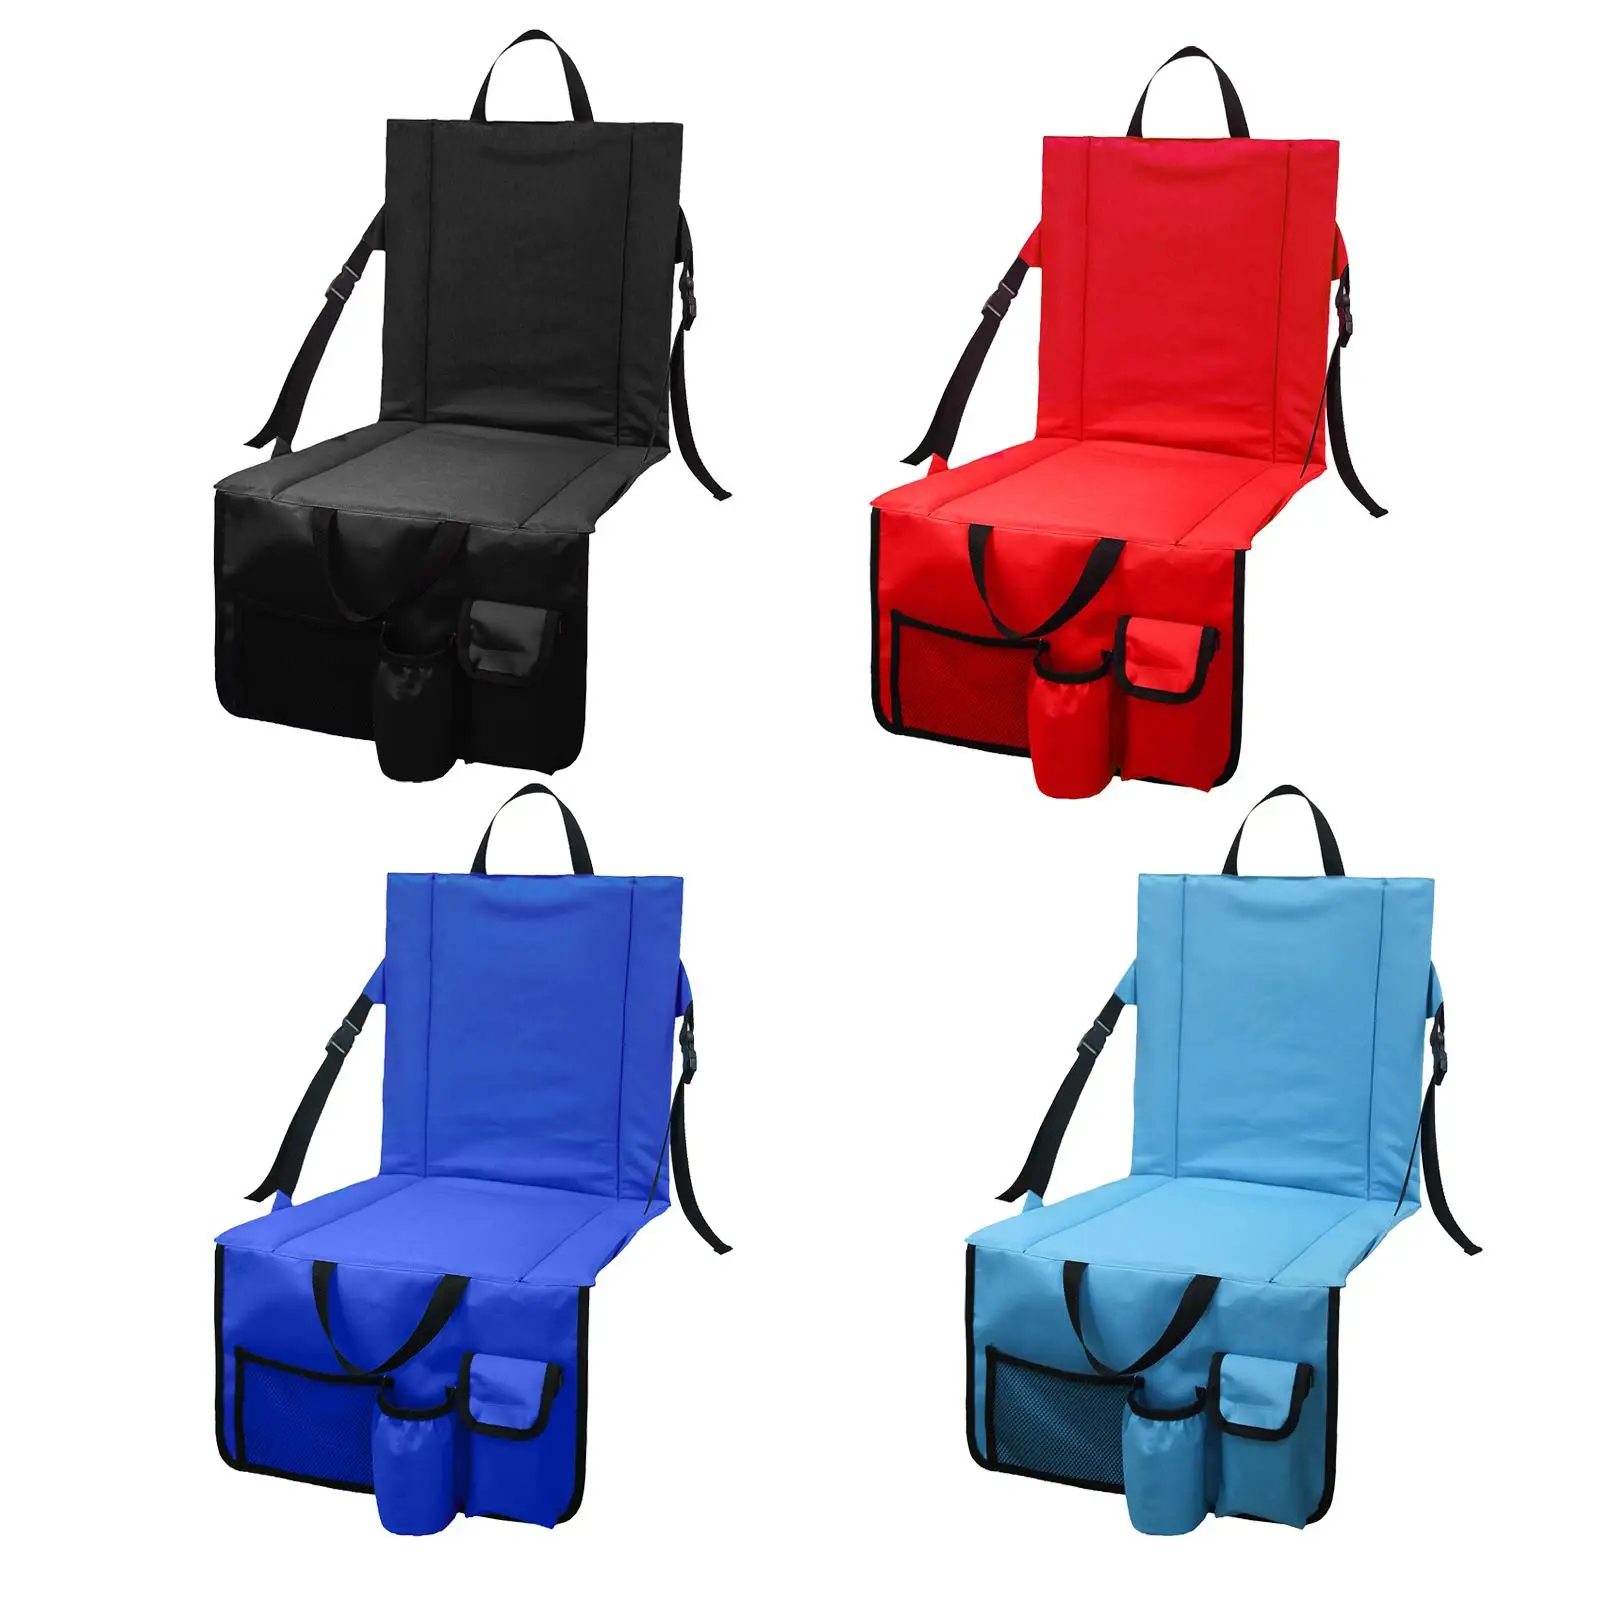 Foldable Stadium Chair Camping Seat Cushion Outdoor Lightweight Travel